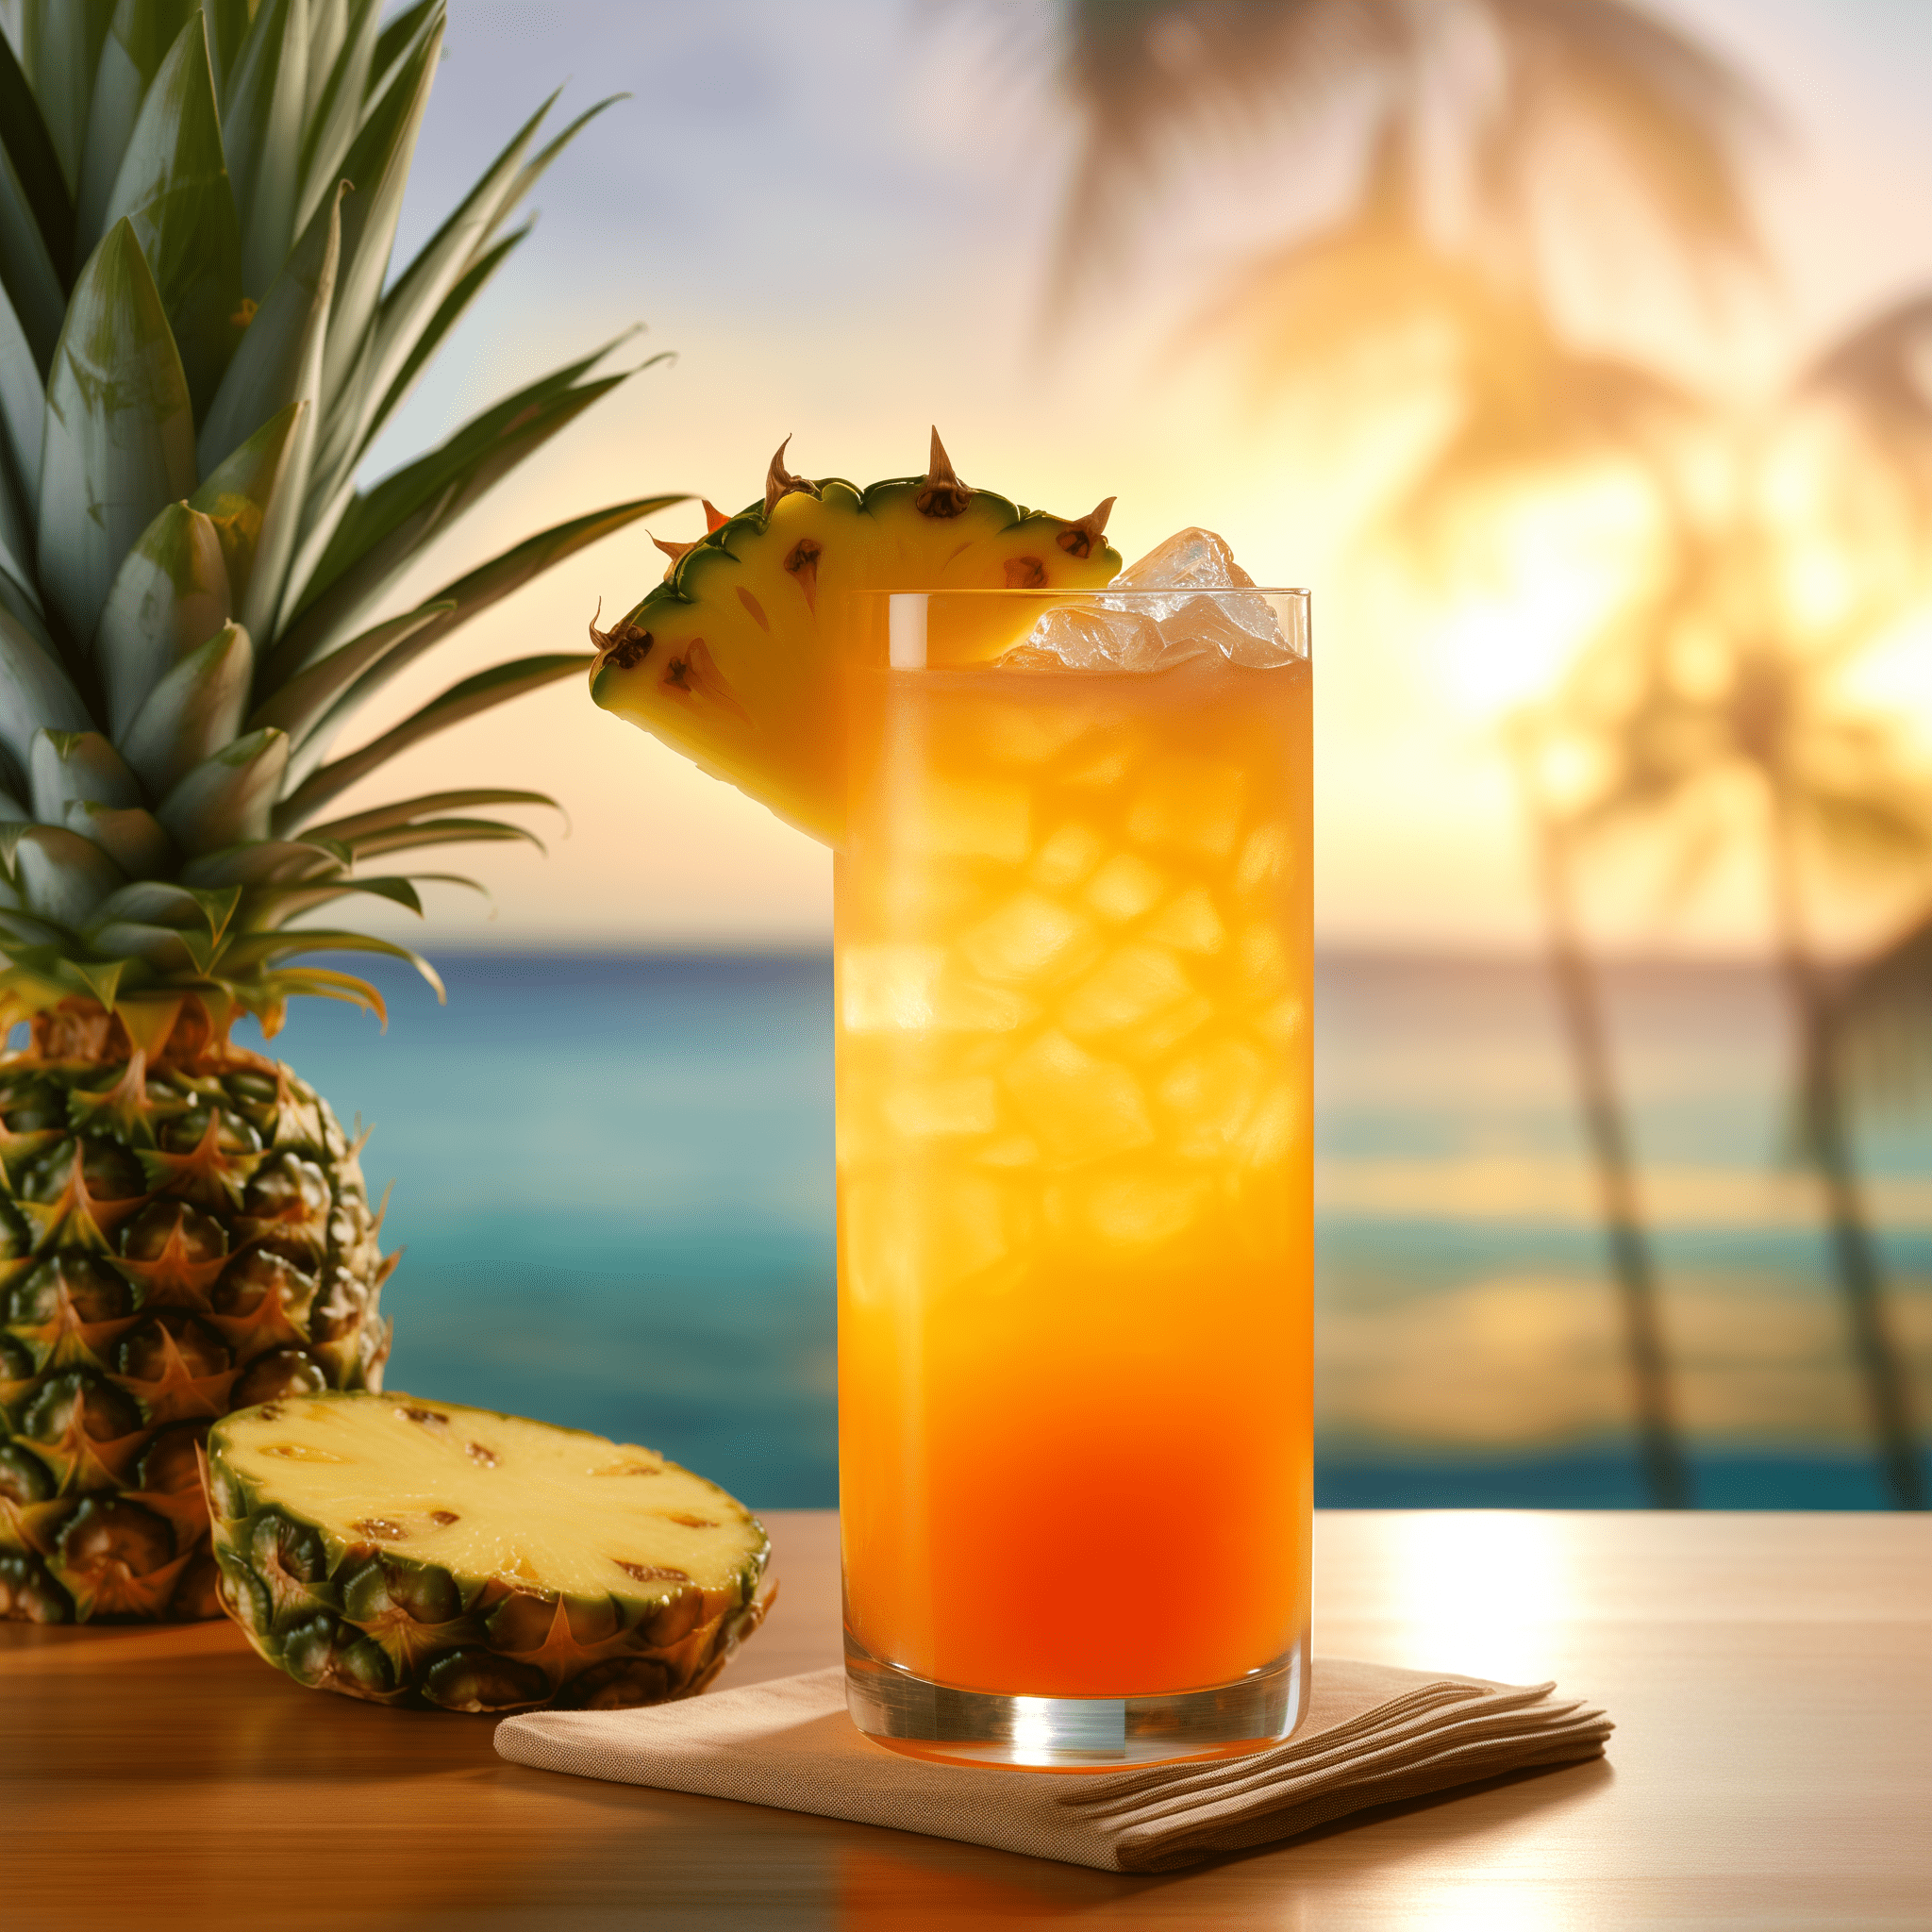 Bikini Bottom Cocktail Recipe - The Bikini Bottom cocktail is a sweet and fruity concoction with a tropical twist. The mango and pineapple rums provide a smooth, sugary base with a hint of Caribbean flair, while the orange and papaya juices add a refreshing zest and a velvety texture to the drink.